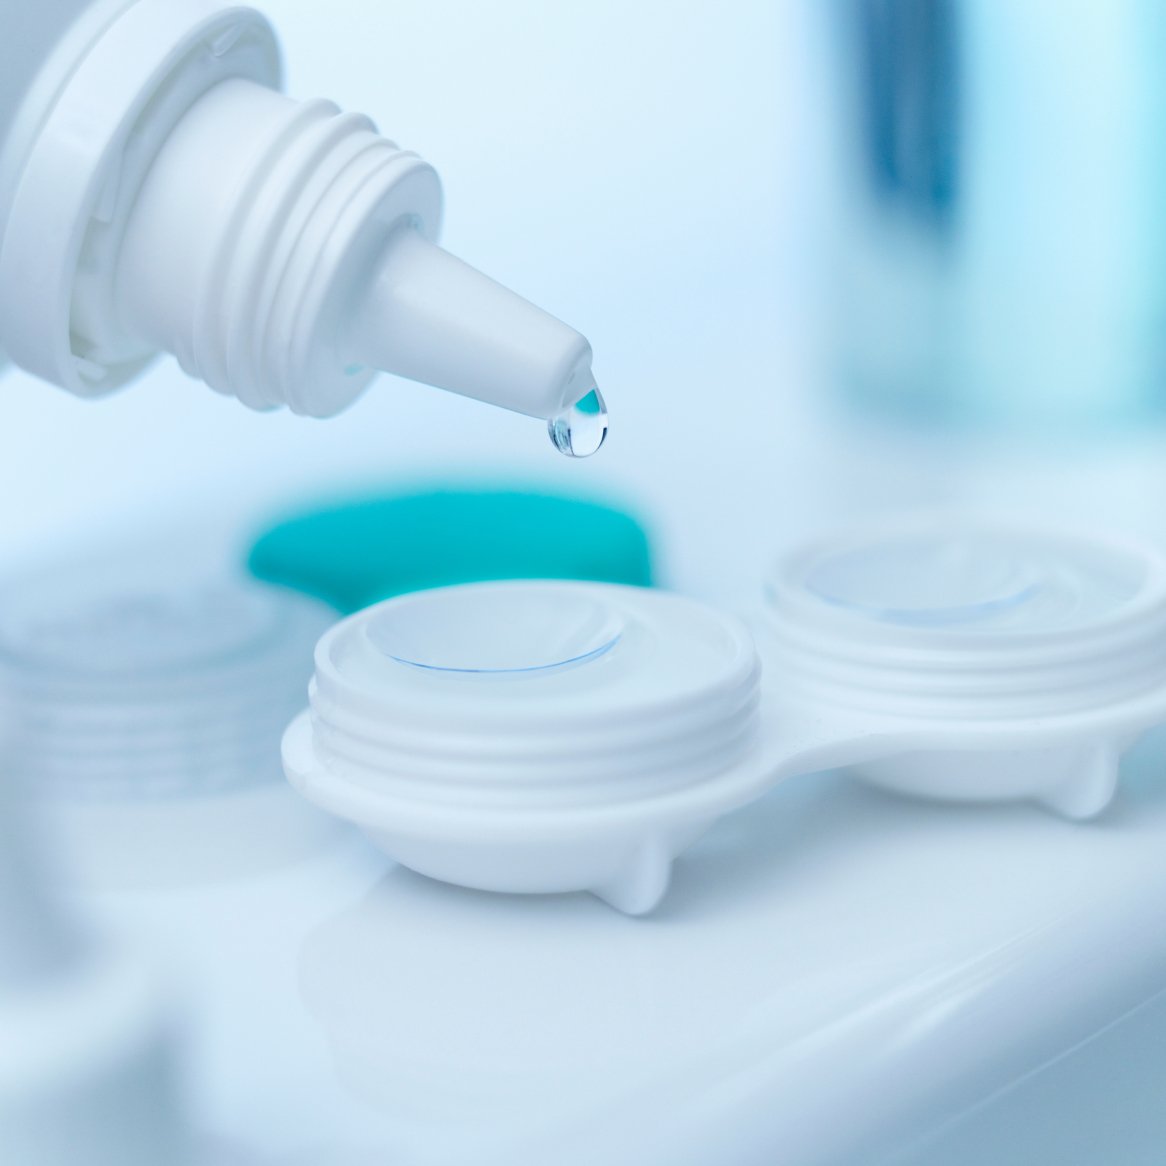 What Is Saline Solution?